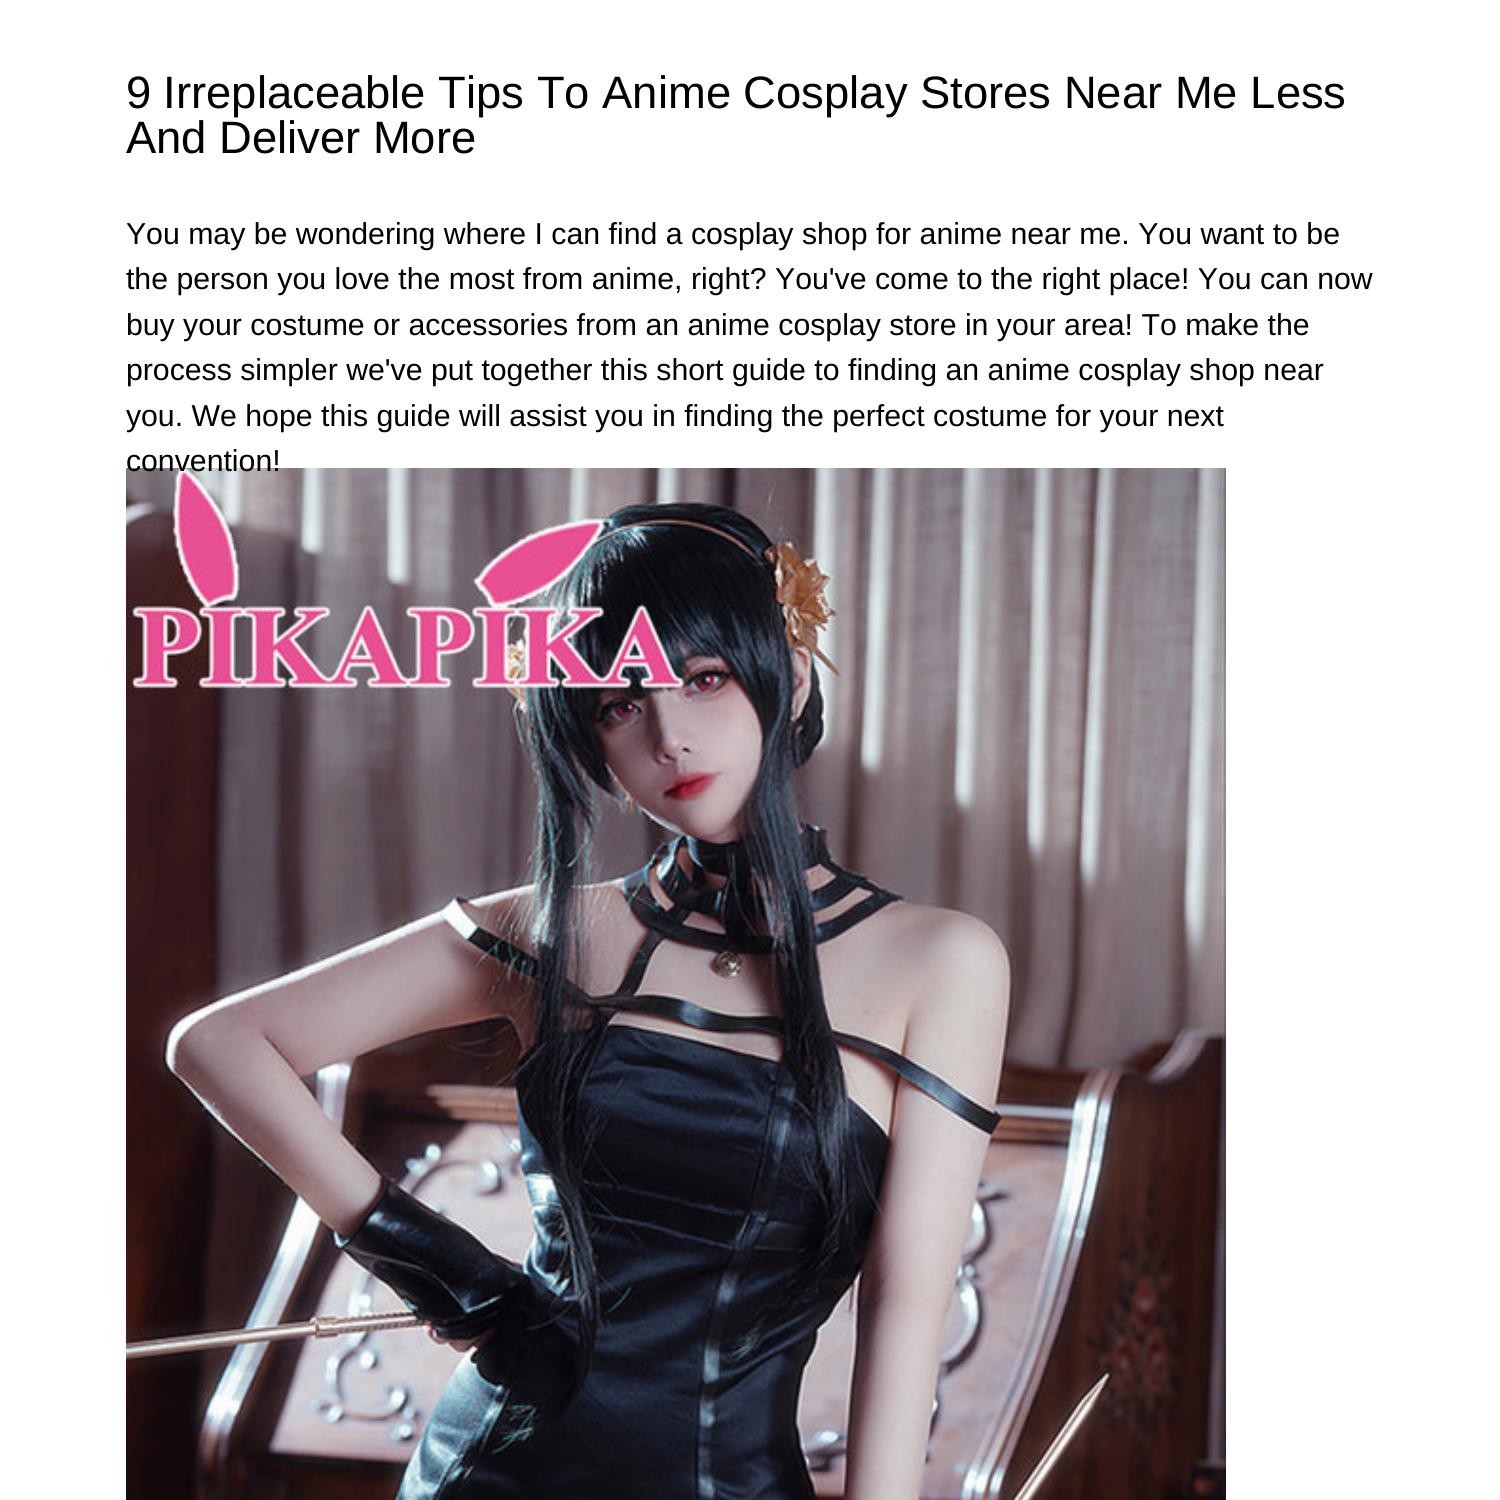 Teach Your Children To Anime Cosplay Stores Near Me While You Still